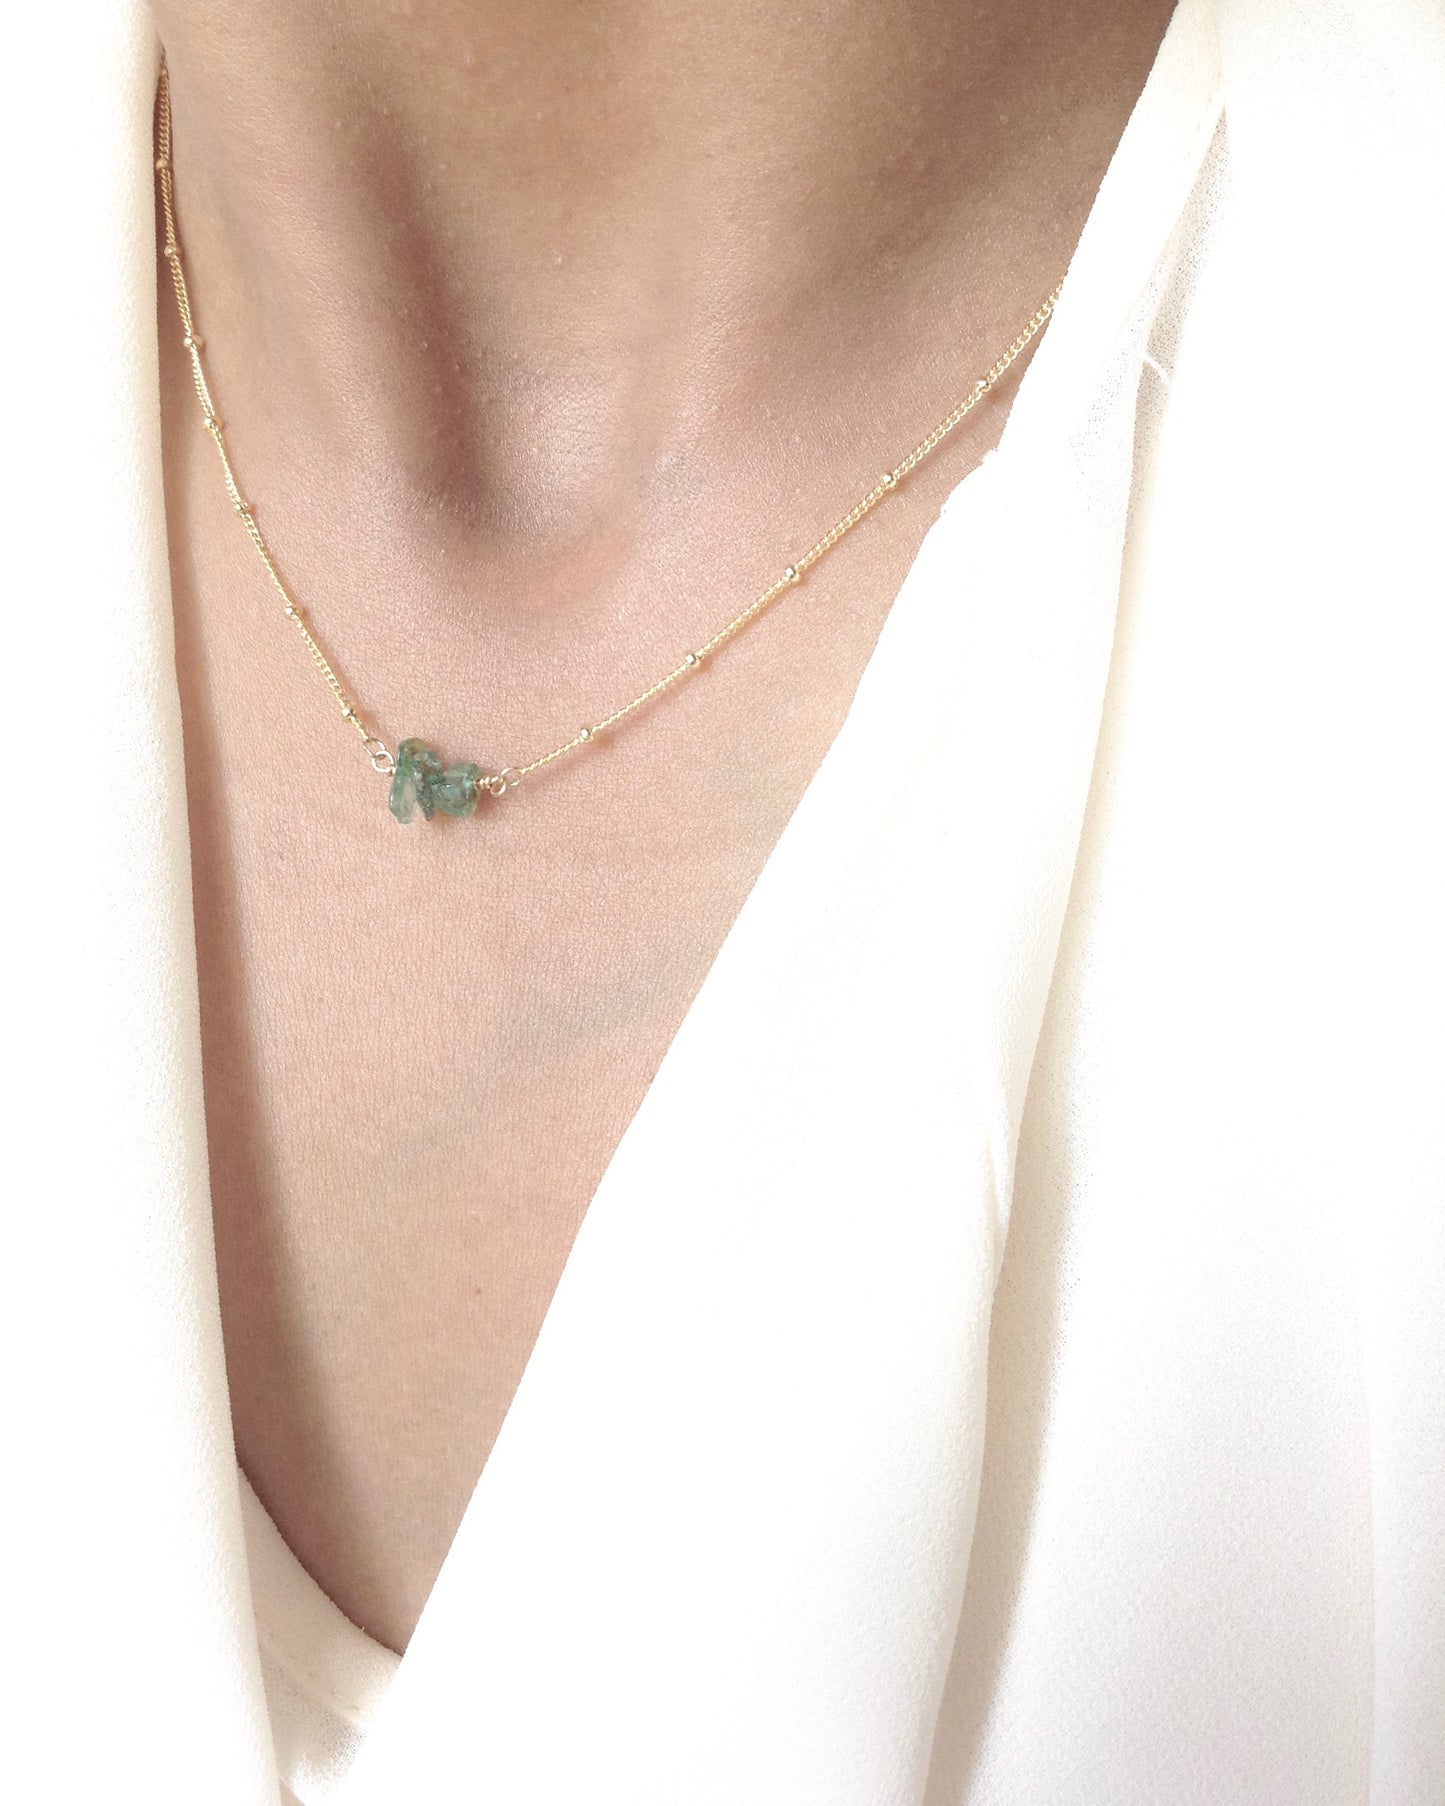 Dainty Raw Emerald Gemstone Bar Necklace in Gold Filled or Sterling Silver | IB Jewelry